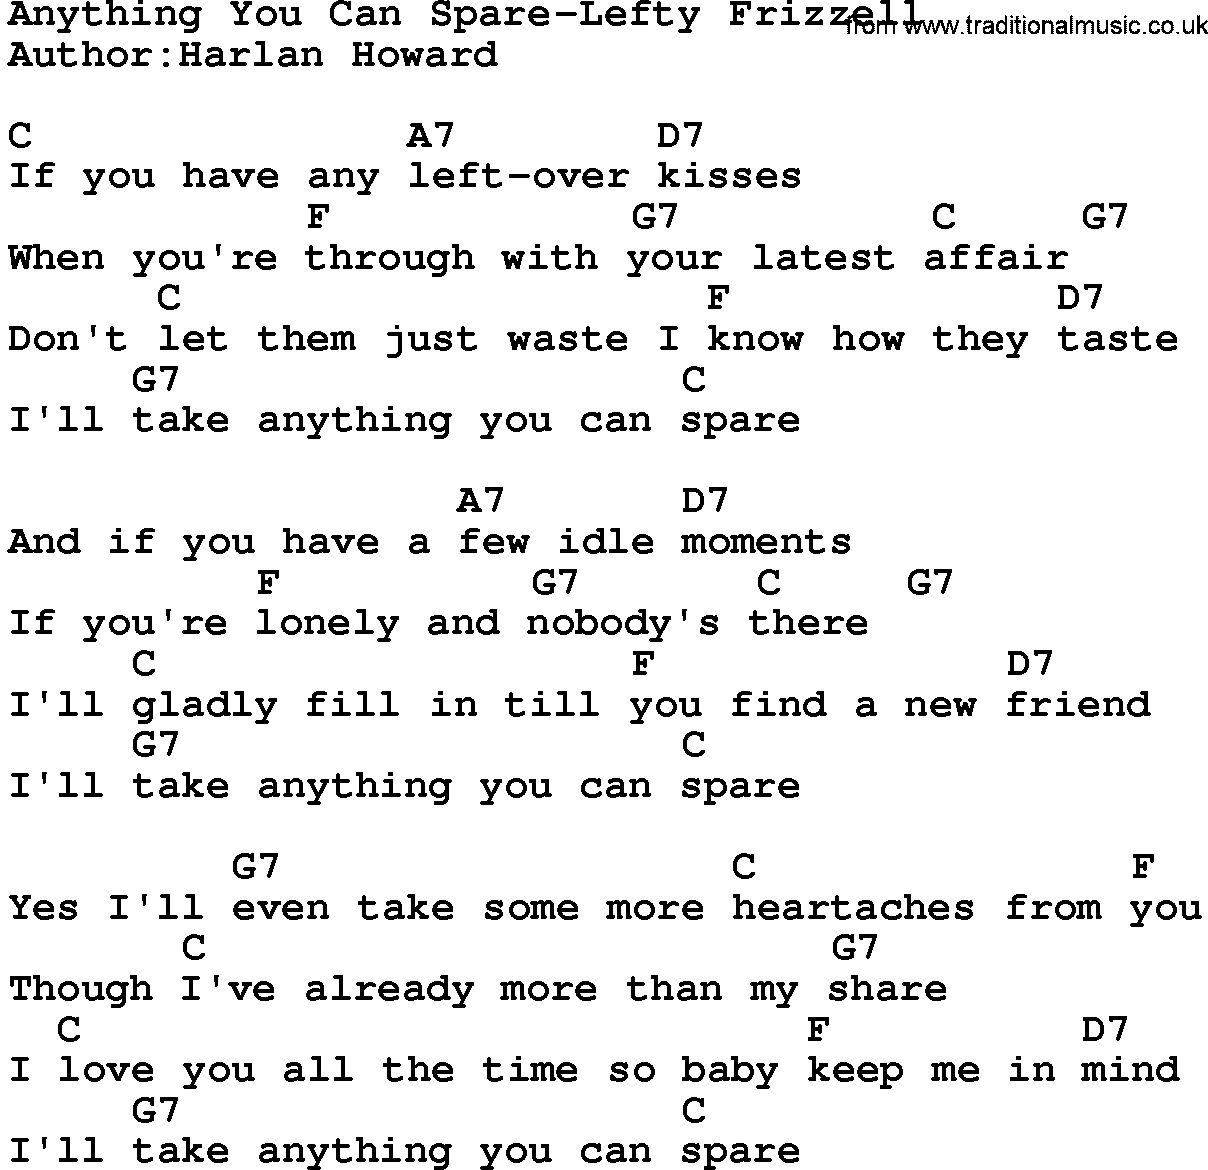 Country music song: Anything You Can Spare-Lefty Frizzell lyrics and chords